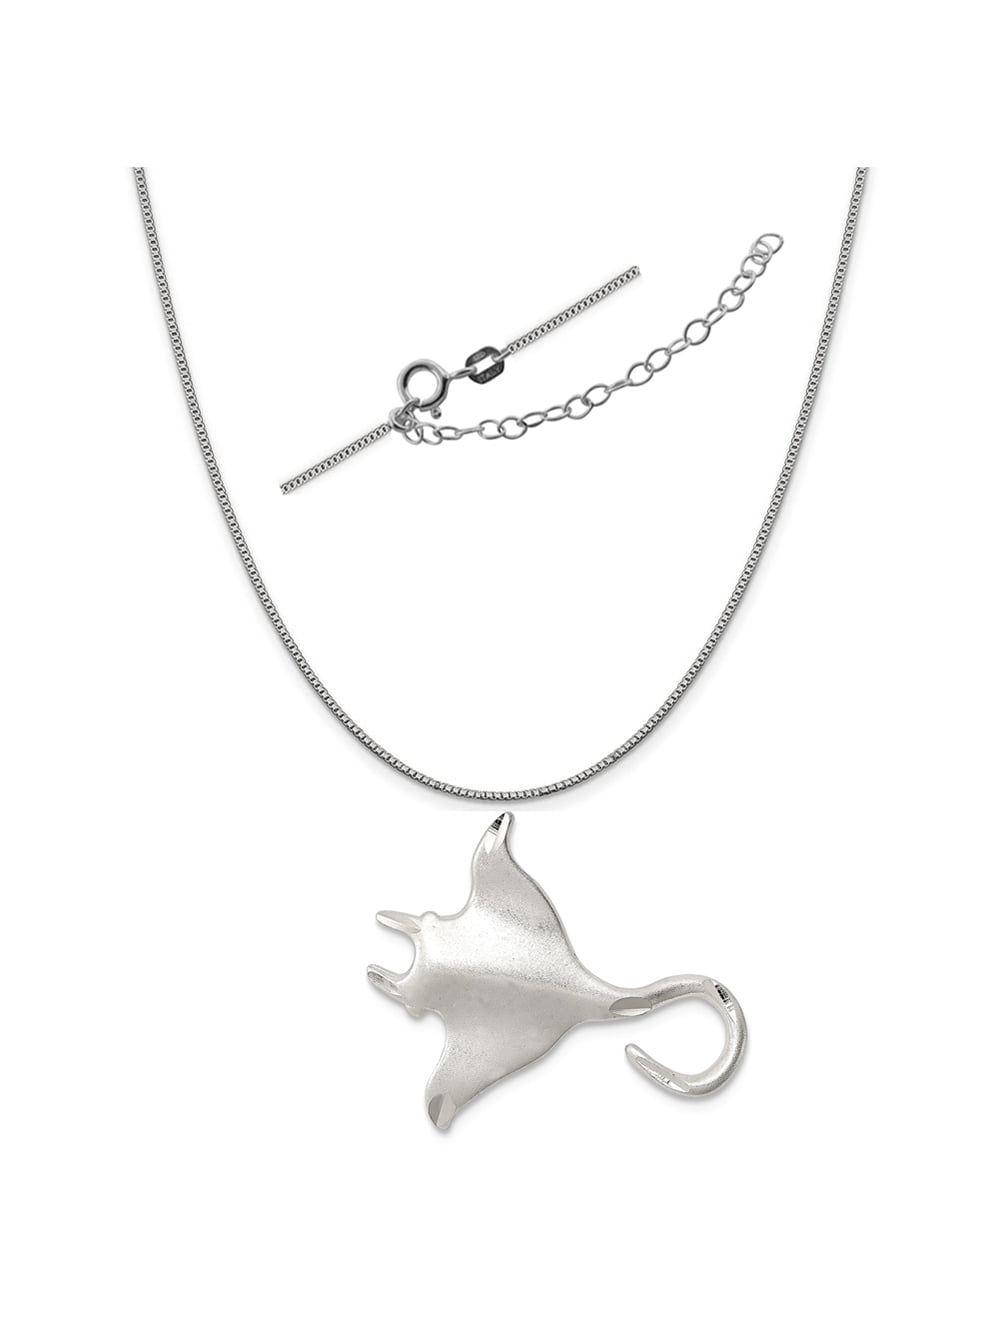 Raposa Elegance Sterling Silver Electric Guitar Charm on a Sterling Silver 18 Curb Chain Necklace 